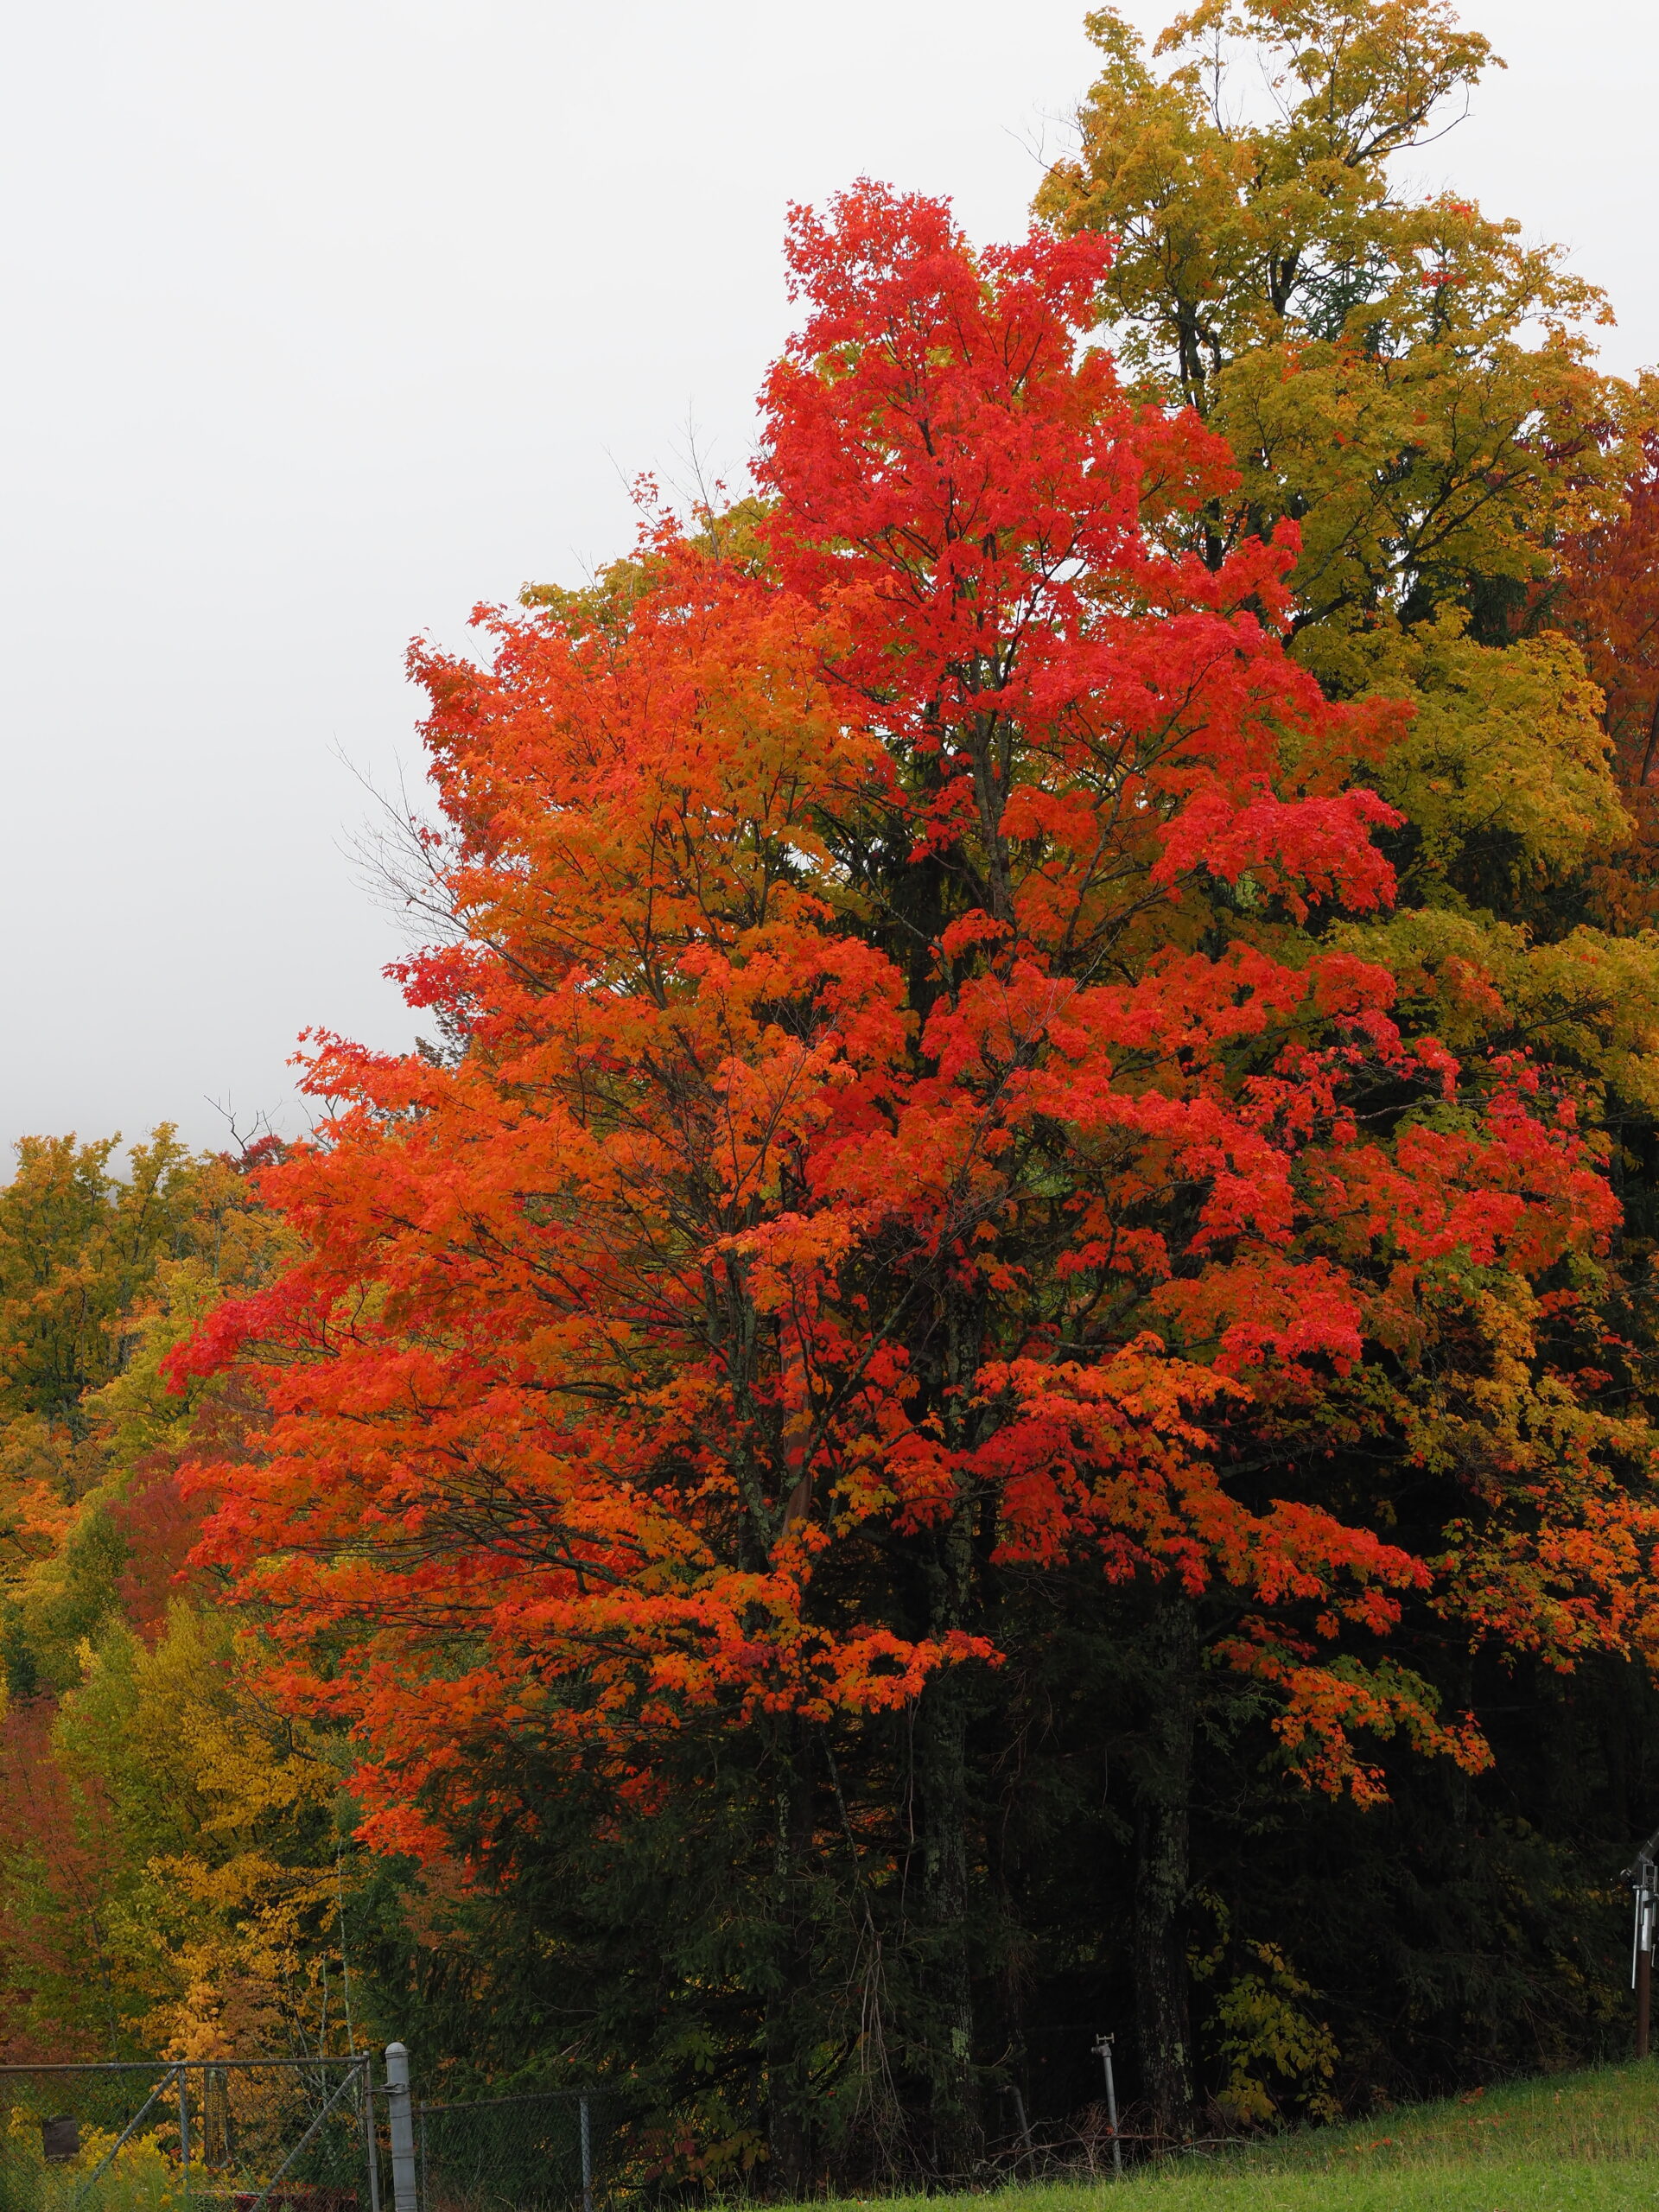 Just like people, no two sugar maples are alike. This one was an orange-red and incredibly striking.  ANDREW MESSINGER